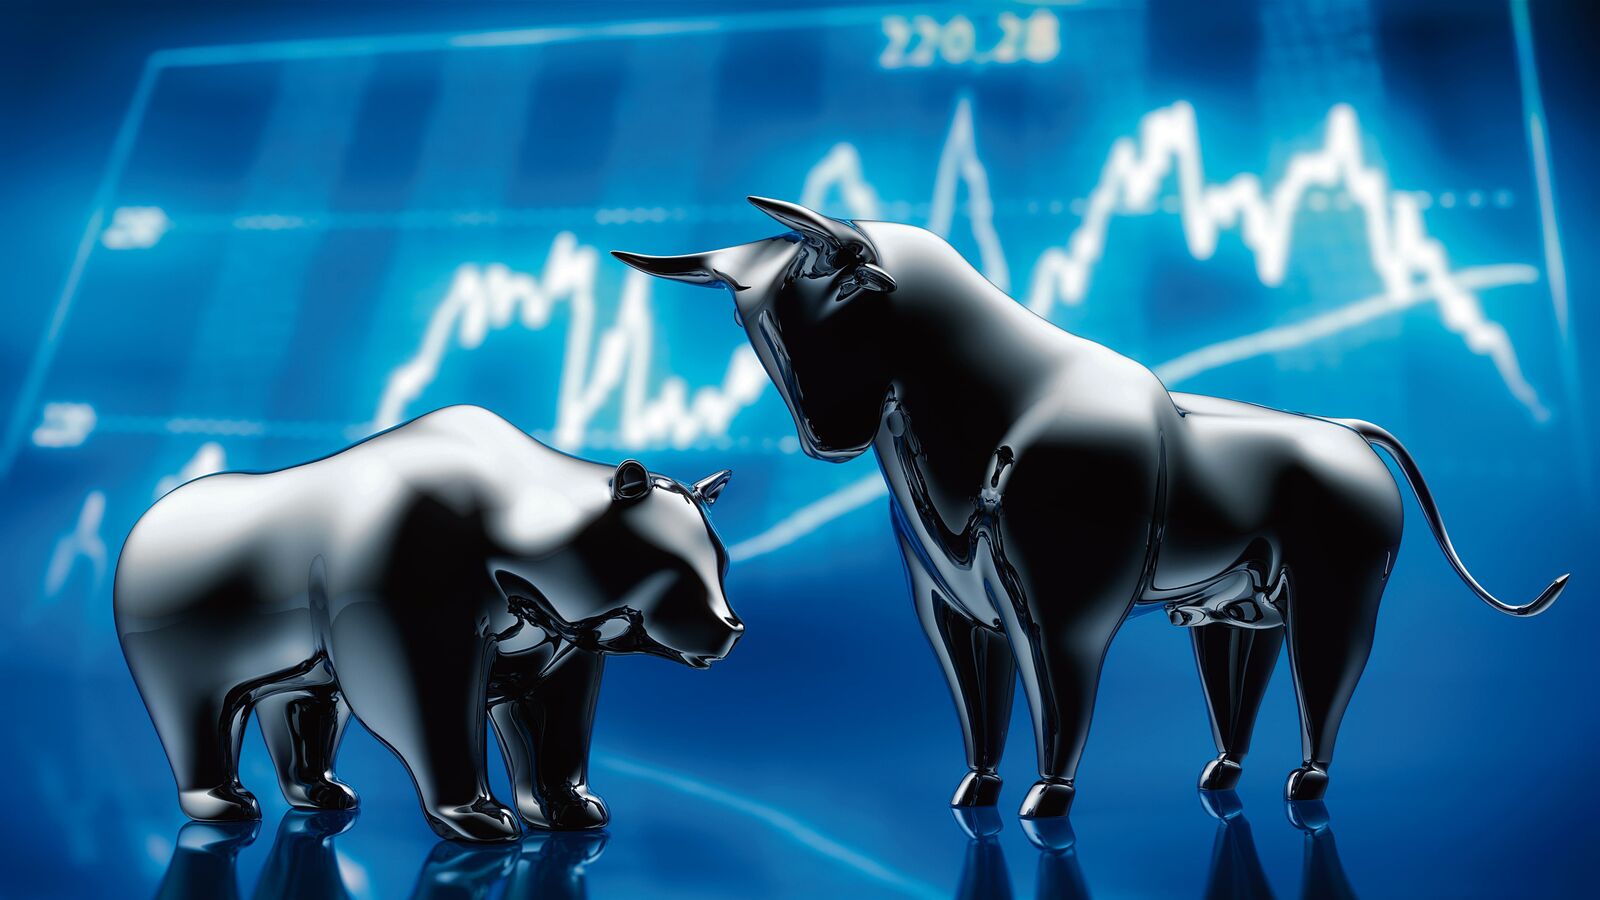 Will the Indian stock market continue its upward momentum this week? Here’s what experts say